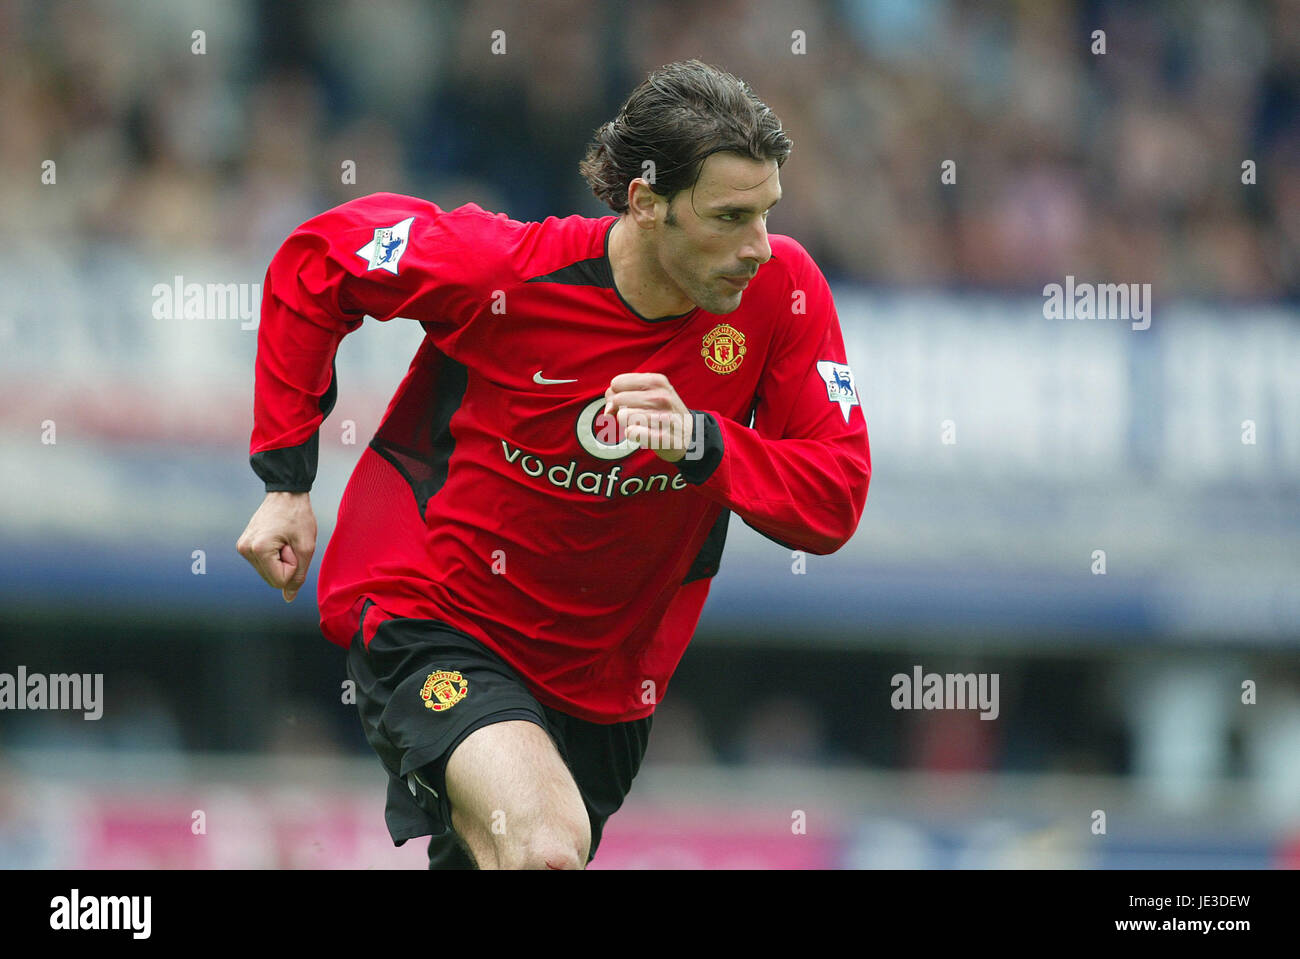 RUUD VAN NISTELROOY MANCHESTER UNITED FC GOODISON PARK EVERTON 11 May 2003 Stock Photo